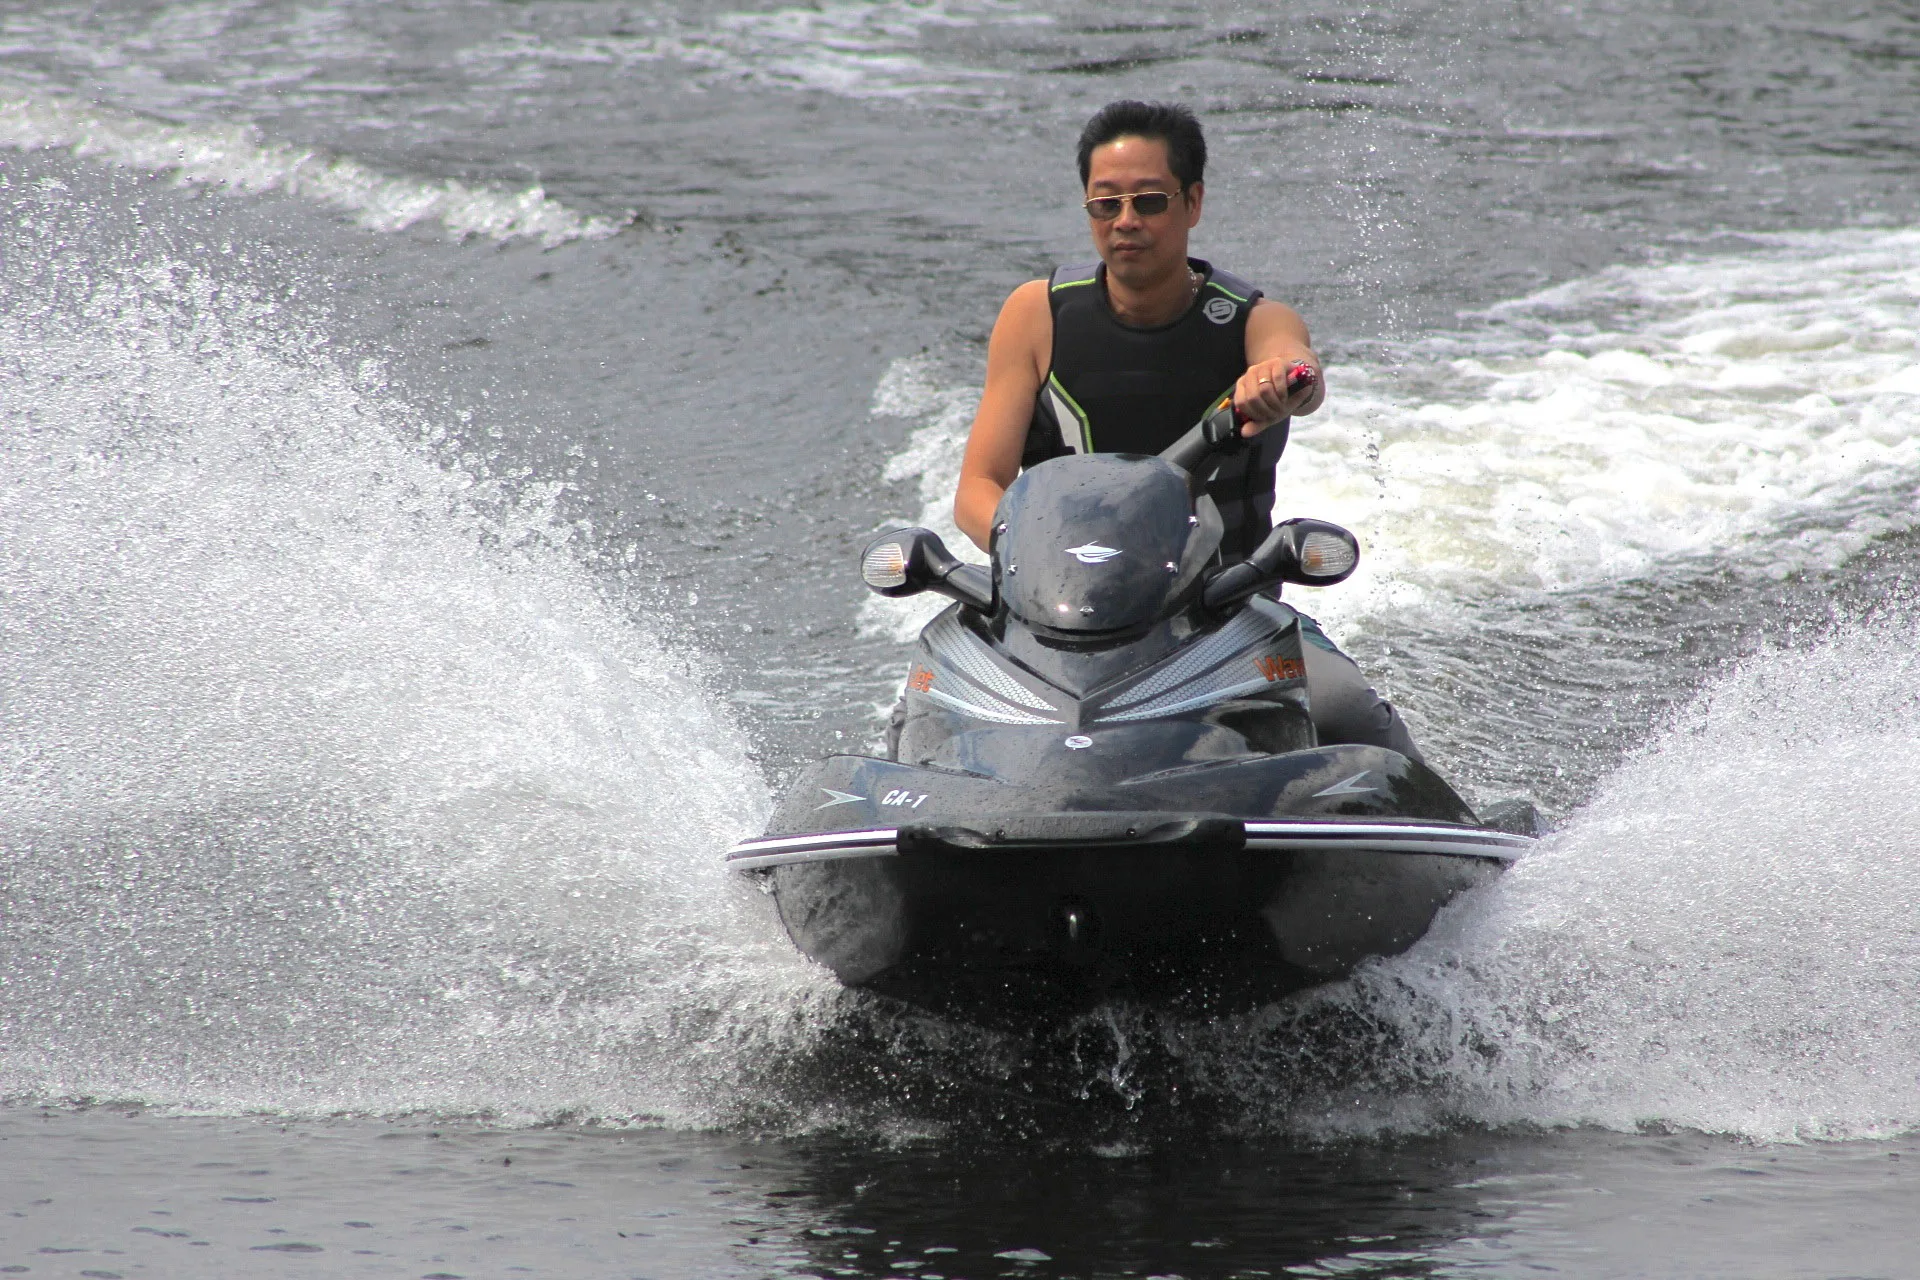 Four-stroke sailor Kawasaki of the new motorboat is similar to the Chinese motorboat private sailor motorbike jetski sea doo sea